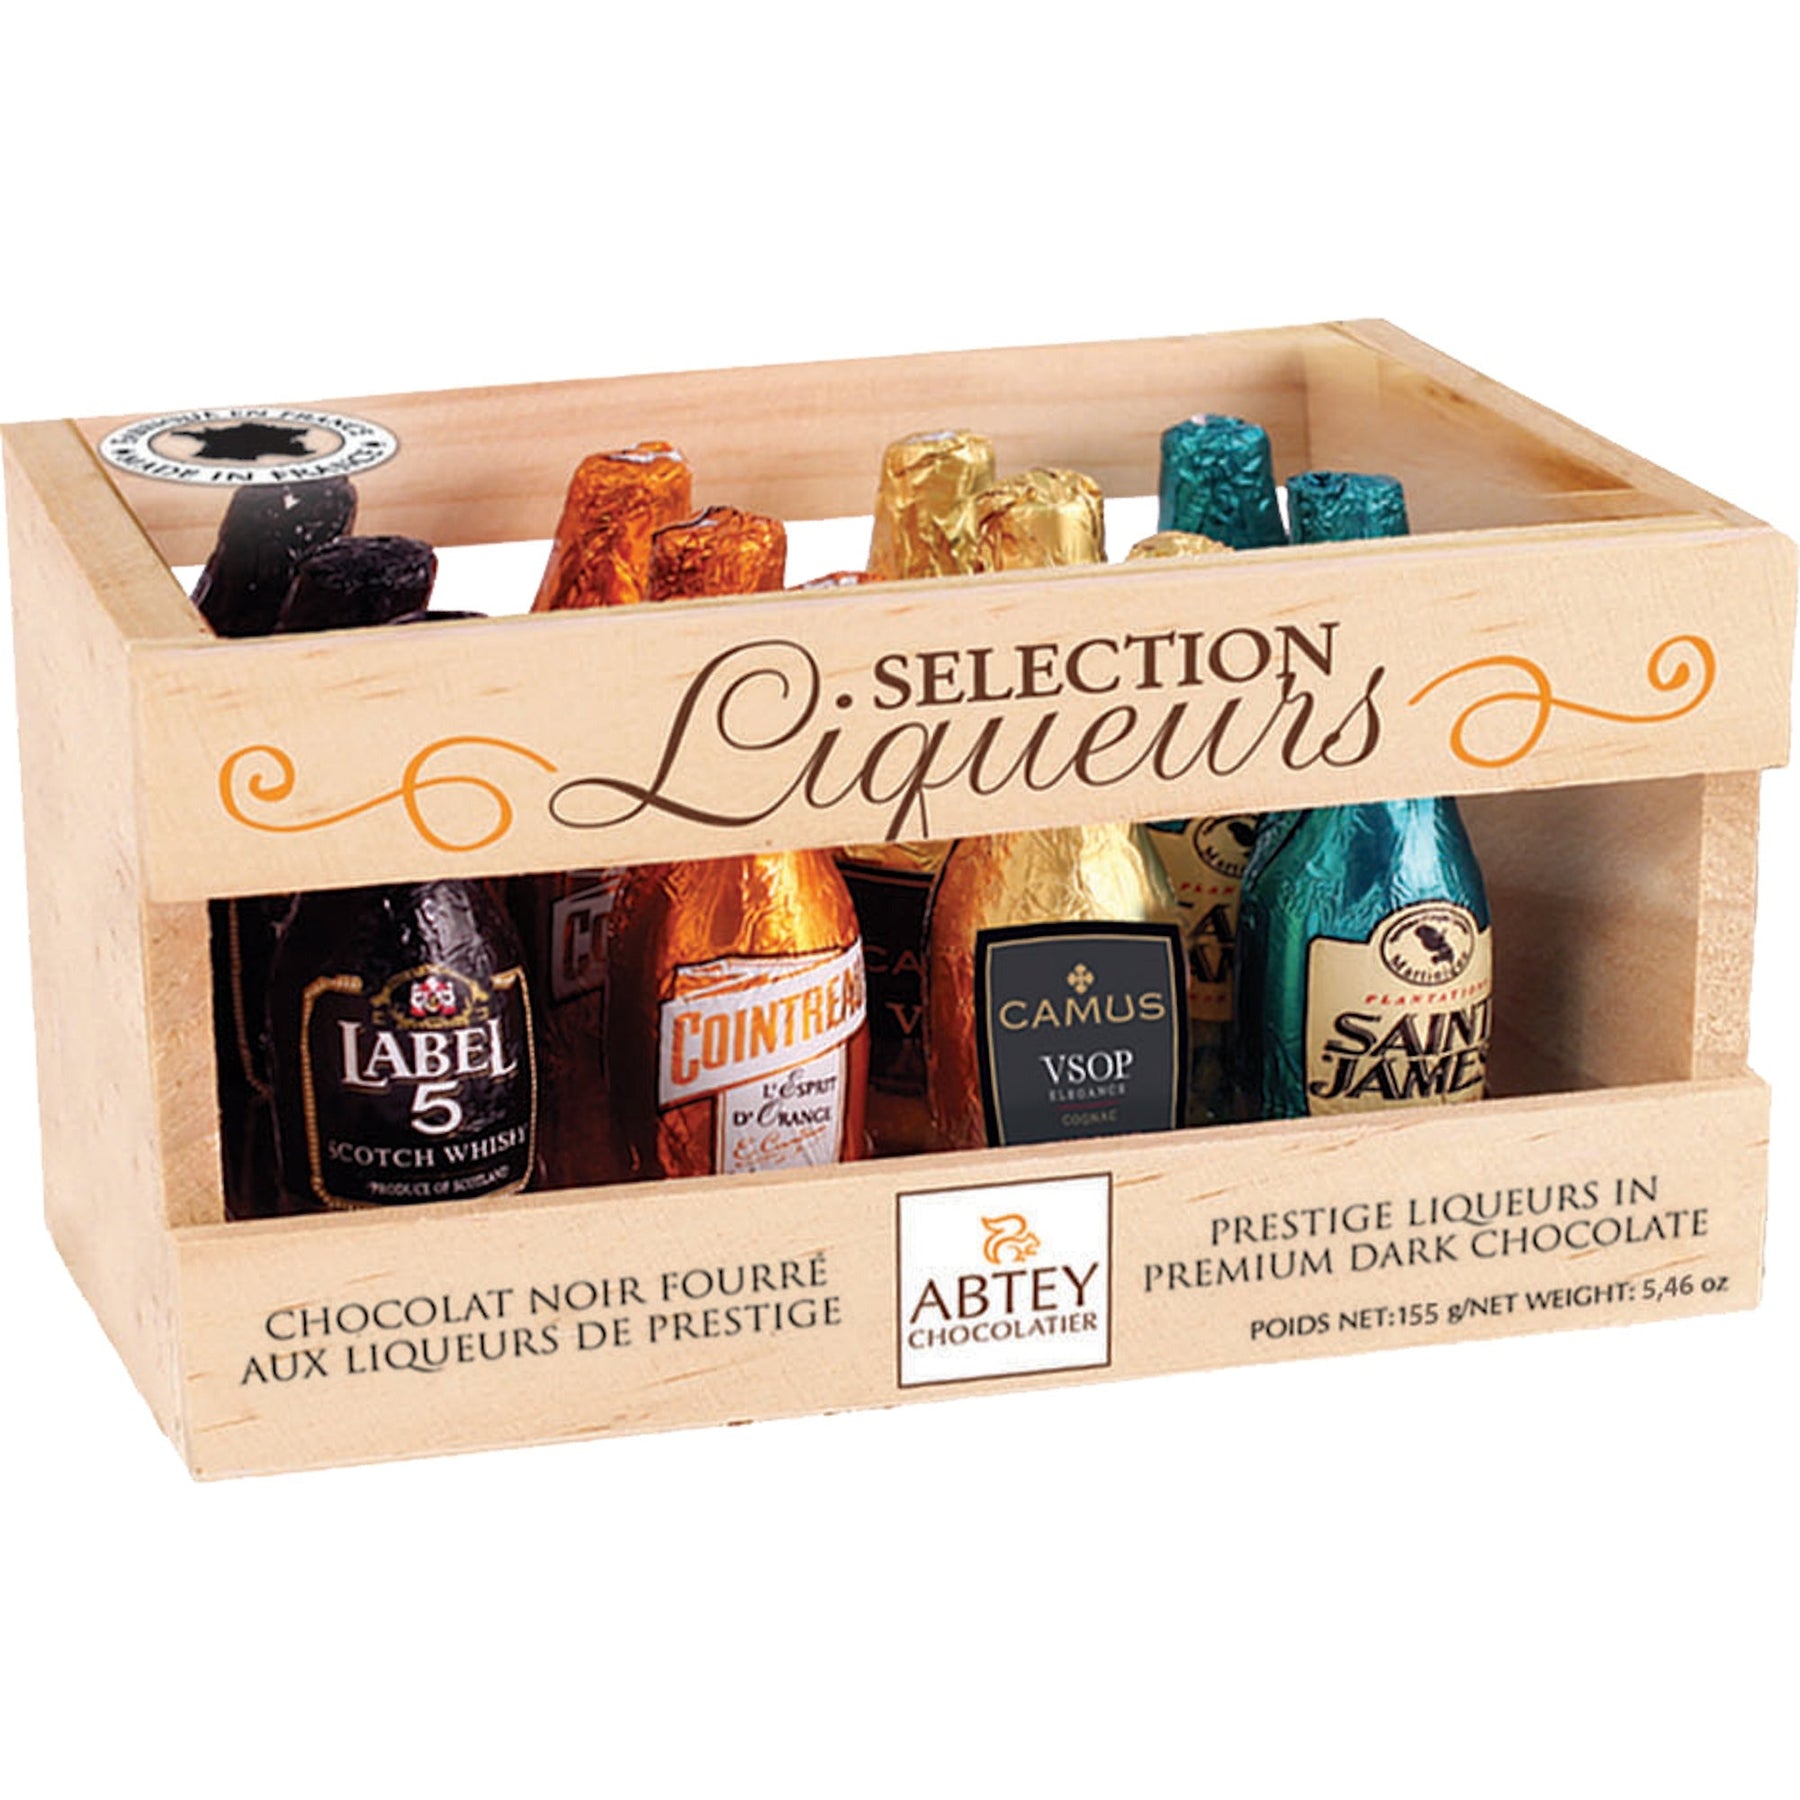 https://cdn.shopify.com/s/files/1/2178/5793/products/abtey-chocolaterie-selection-liqueurs-chocolate-bottles-in-wood-crate-142832_1800x1800.jpg?v=1698415031